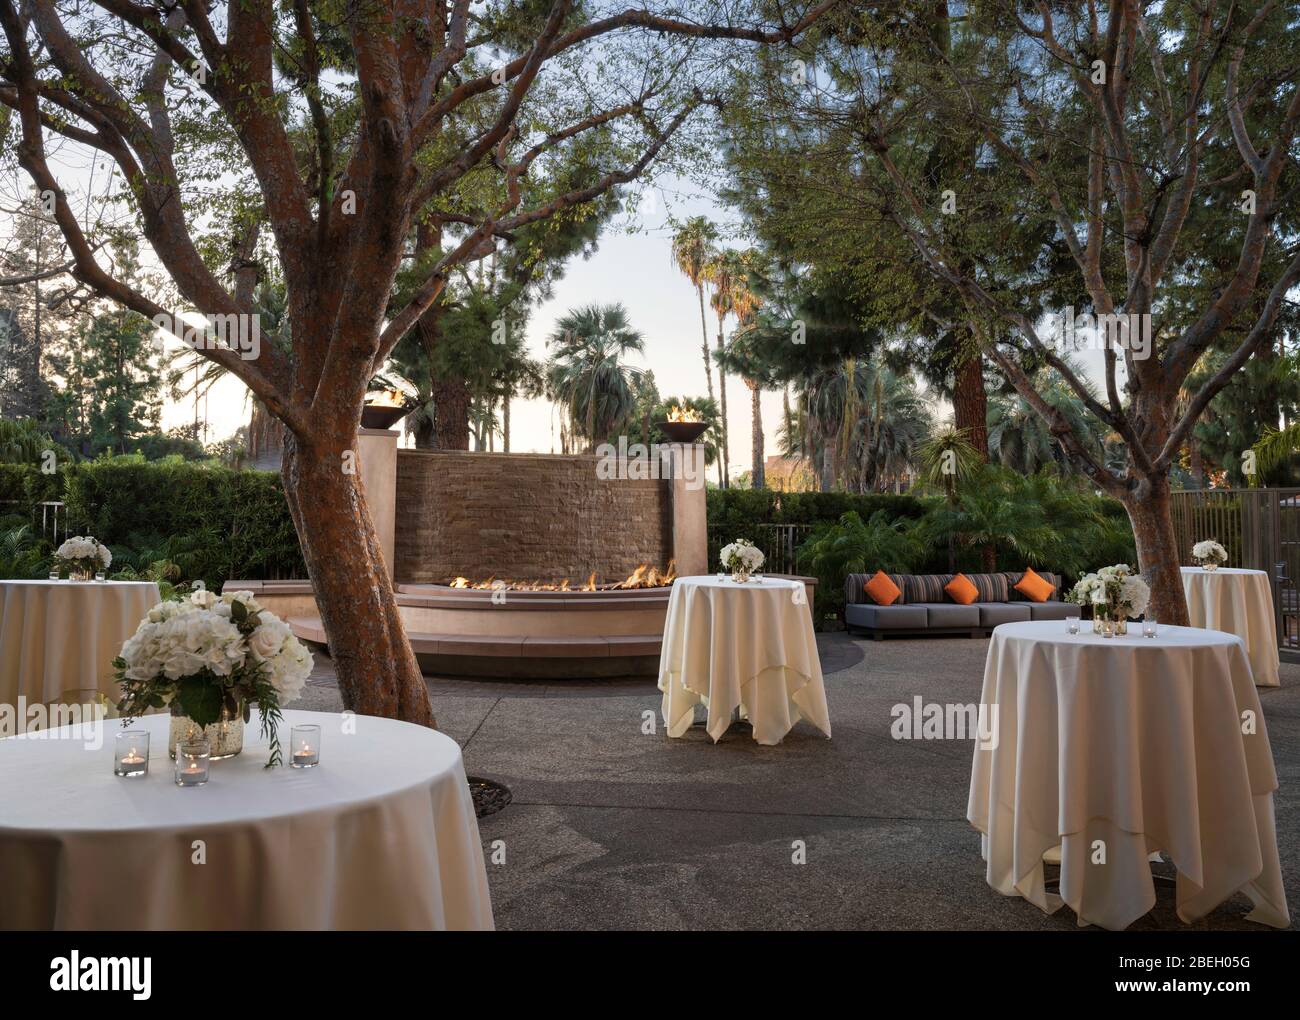 Tables dressed with linen in outdoor space for a reception Stock Photo